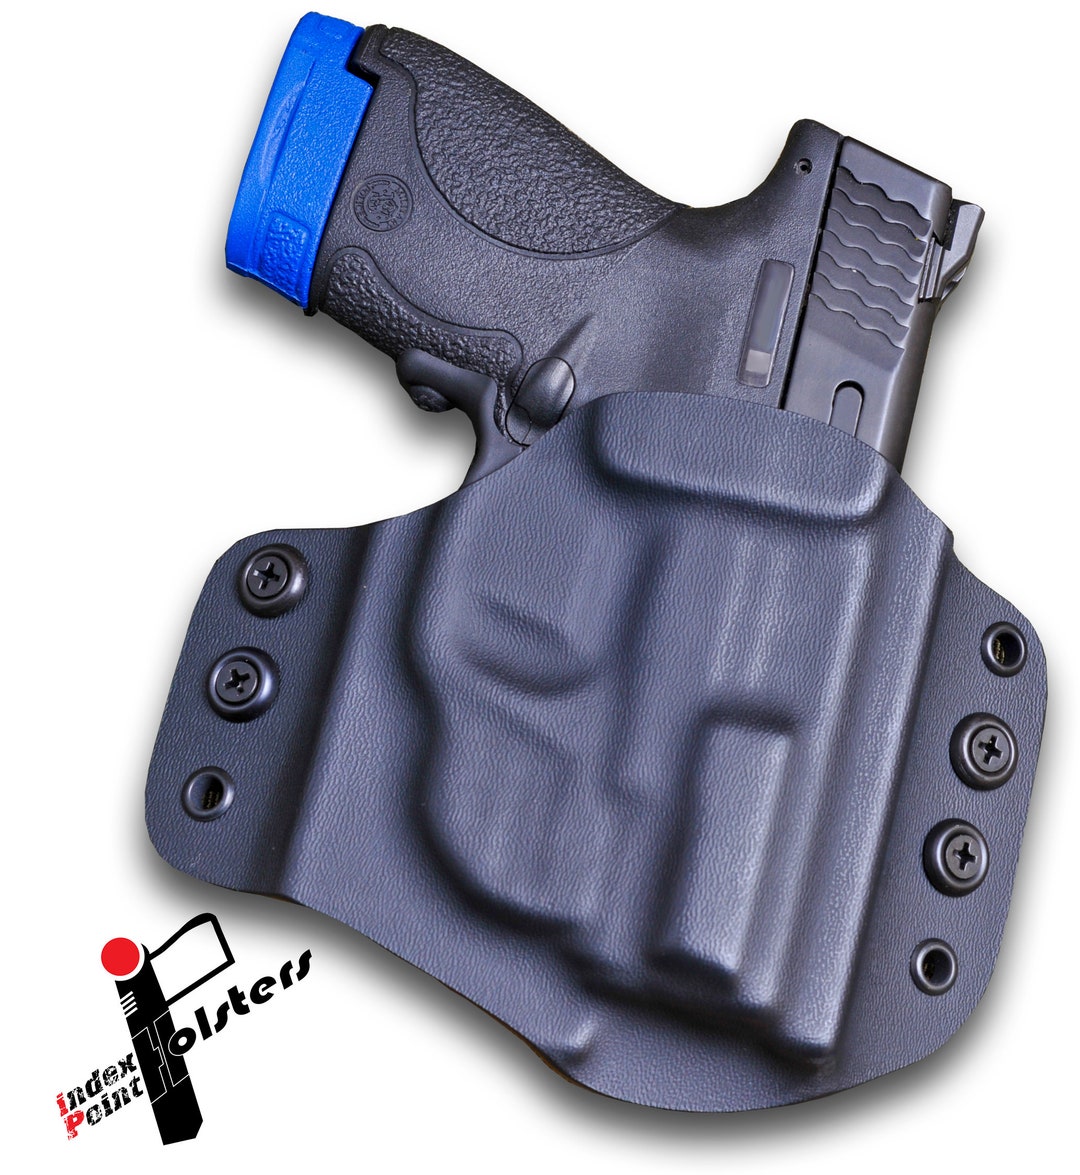 Kydex Holster, Smith & Wesson Shield 9mm / .40 SW W/ LG-489G Green